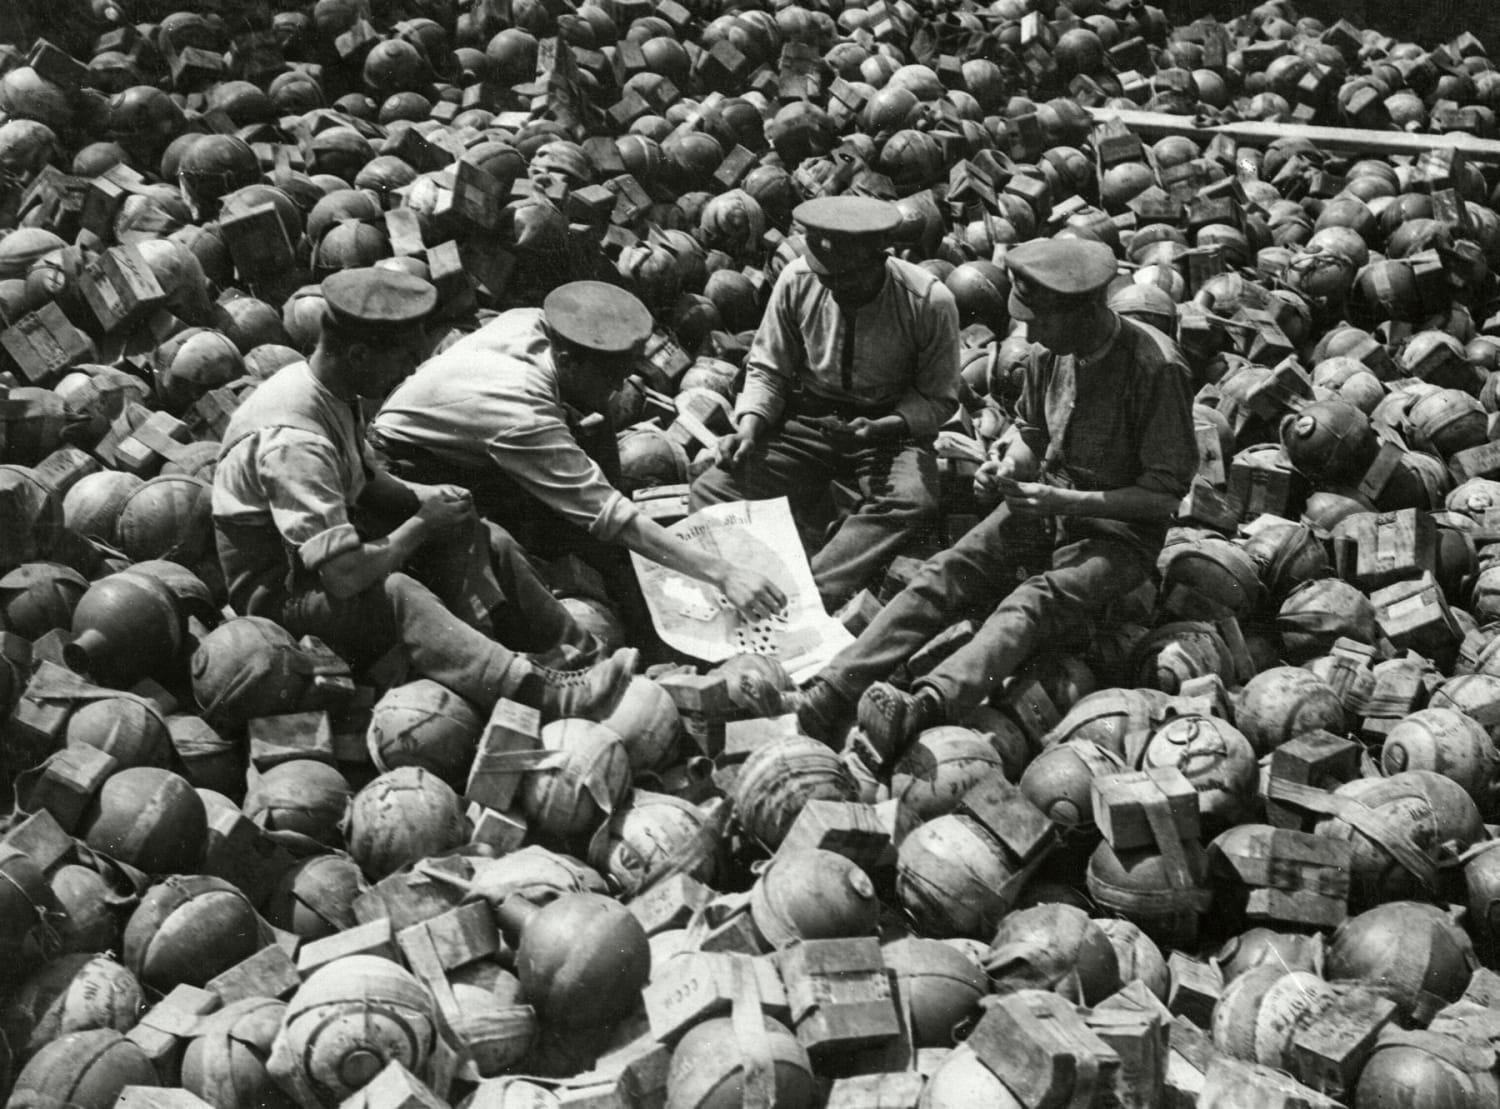 July 19, 1916: British soldiers playing cards on a large pile of trench mortar shells near Archeux, France, on the Western Front during WWI.